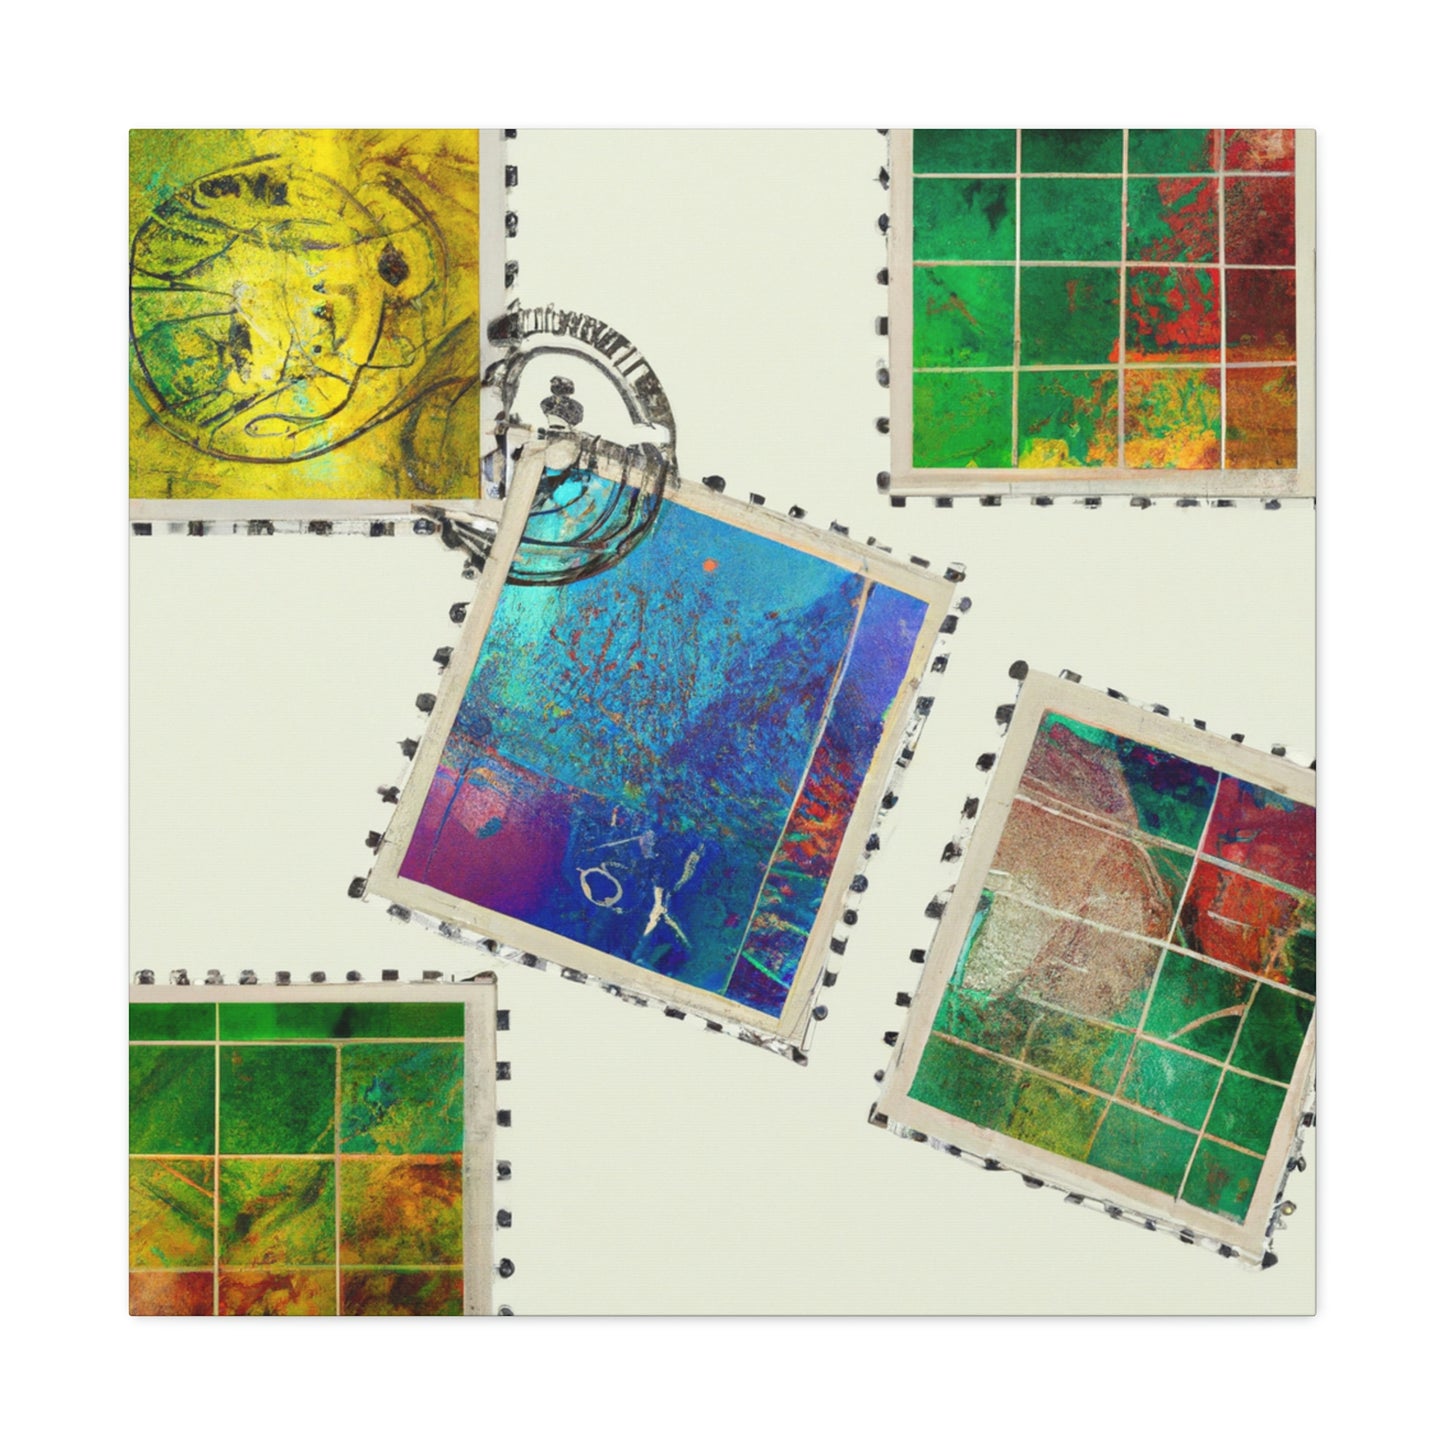 Global Postage Stamps. - Postage Stamp Collector Canvas Wall Art